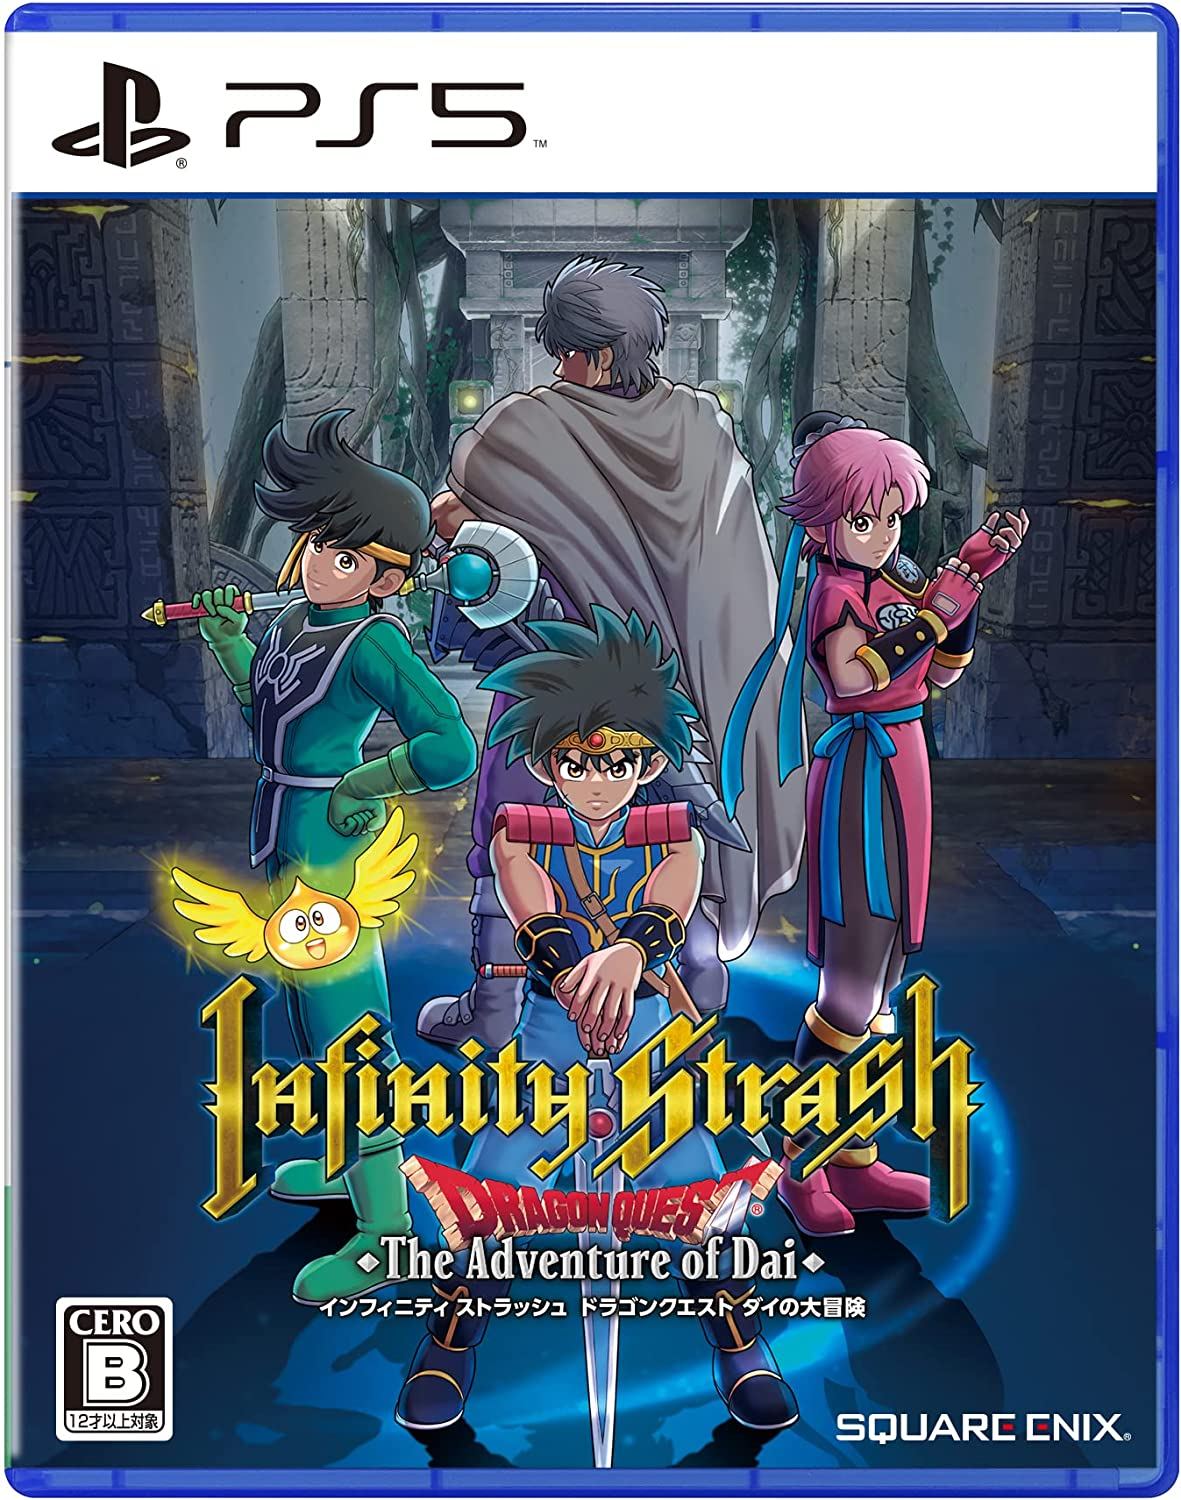 Review  Infinity Strash: DRAGON QUEST The Adventure of Dai - NintendoBoy